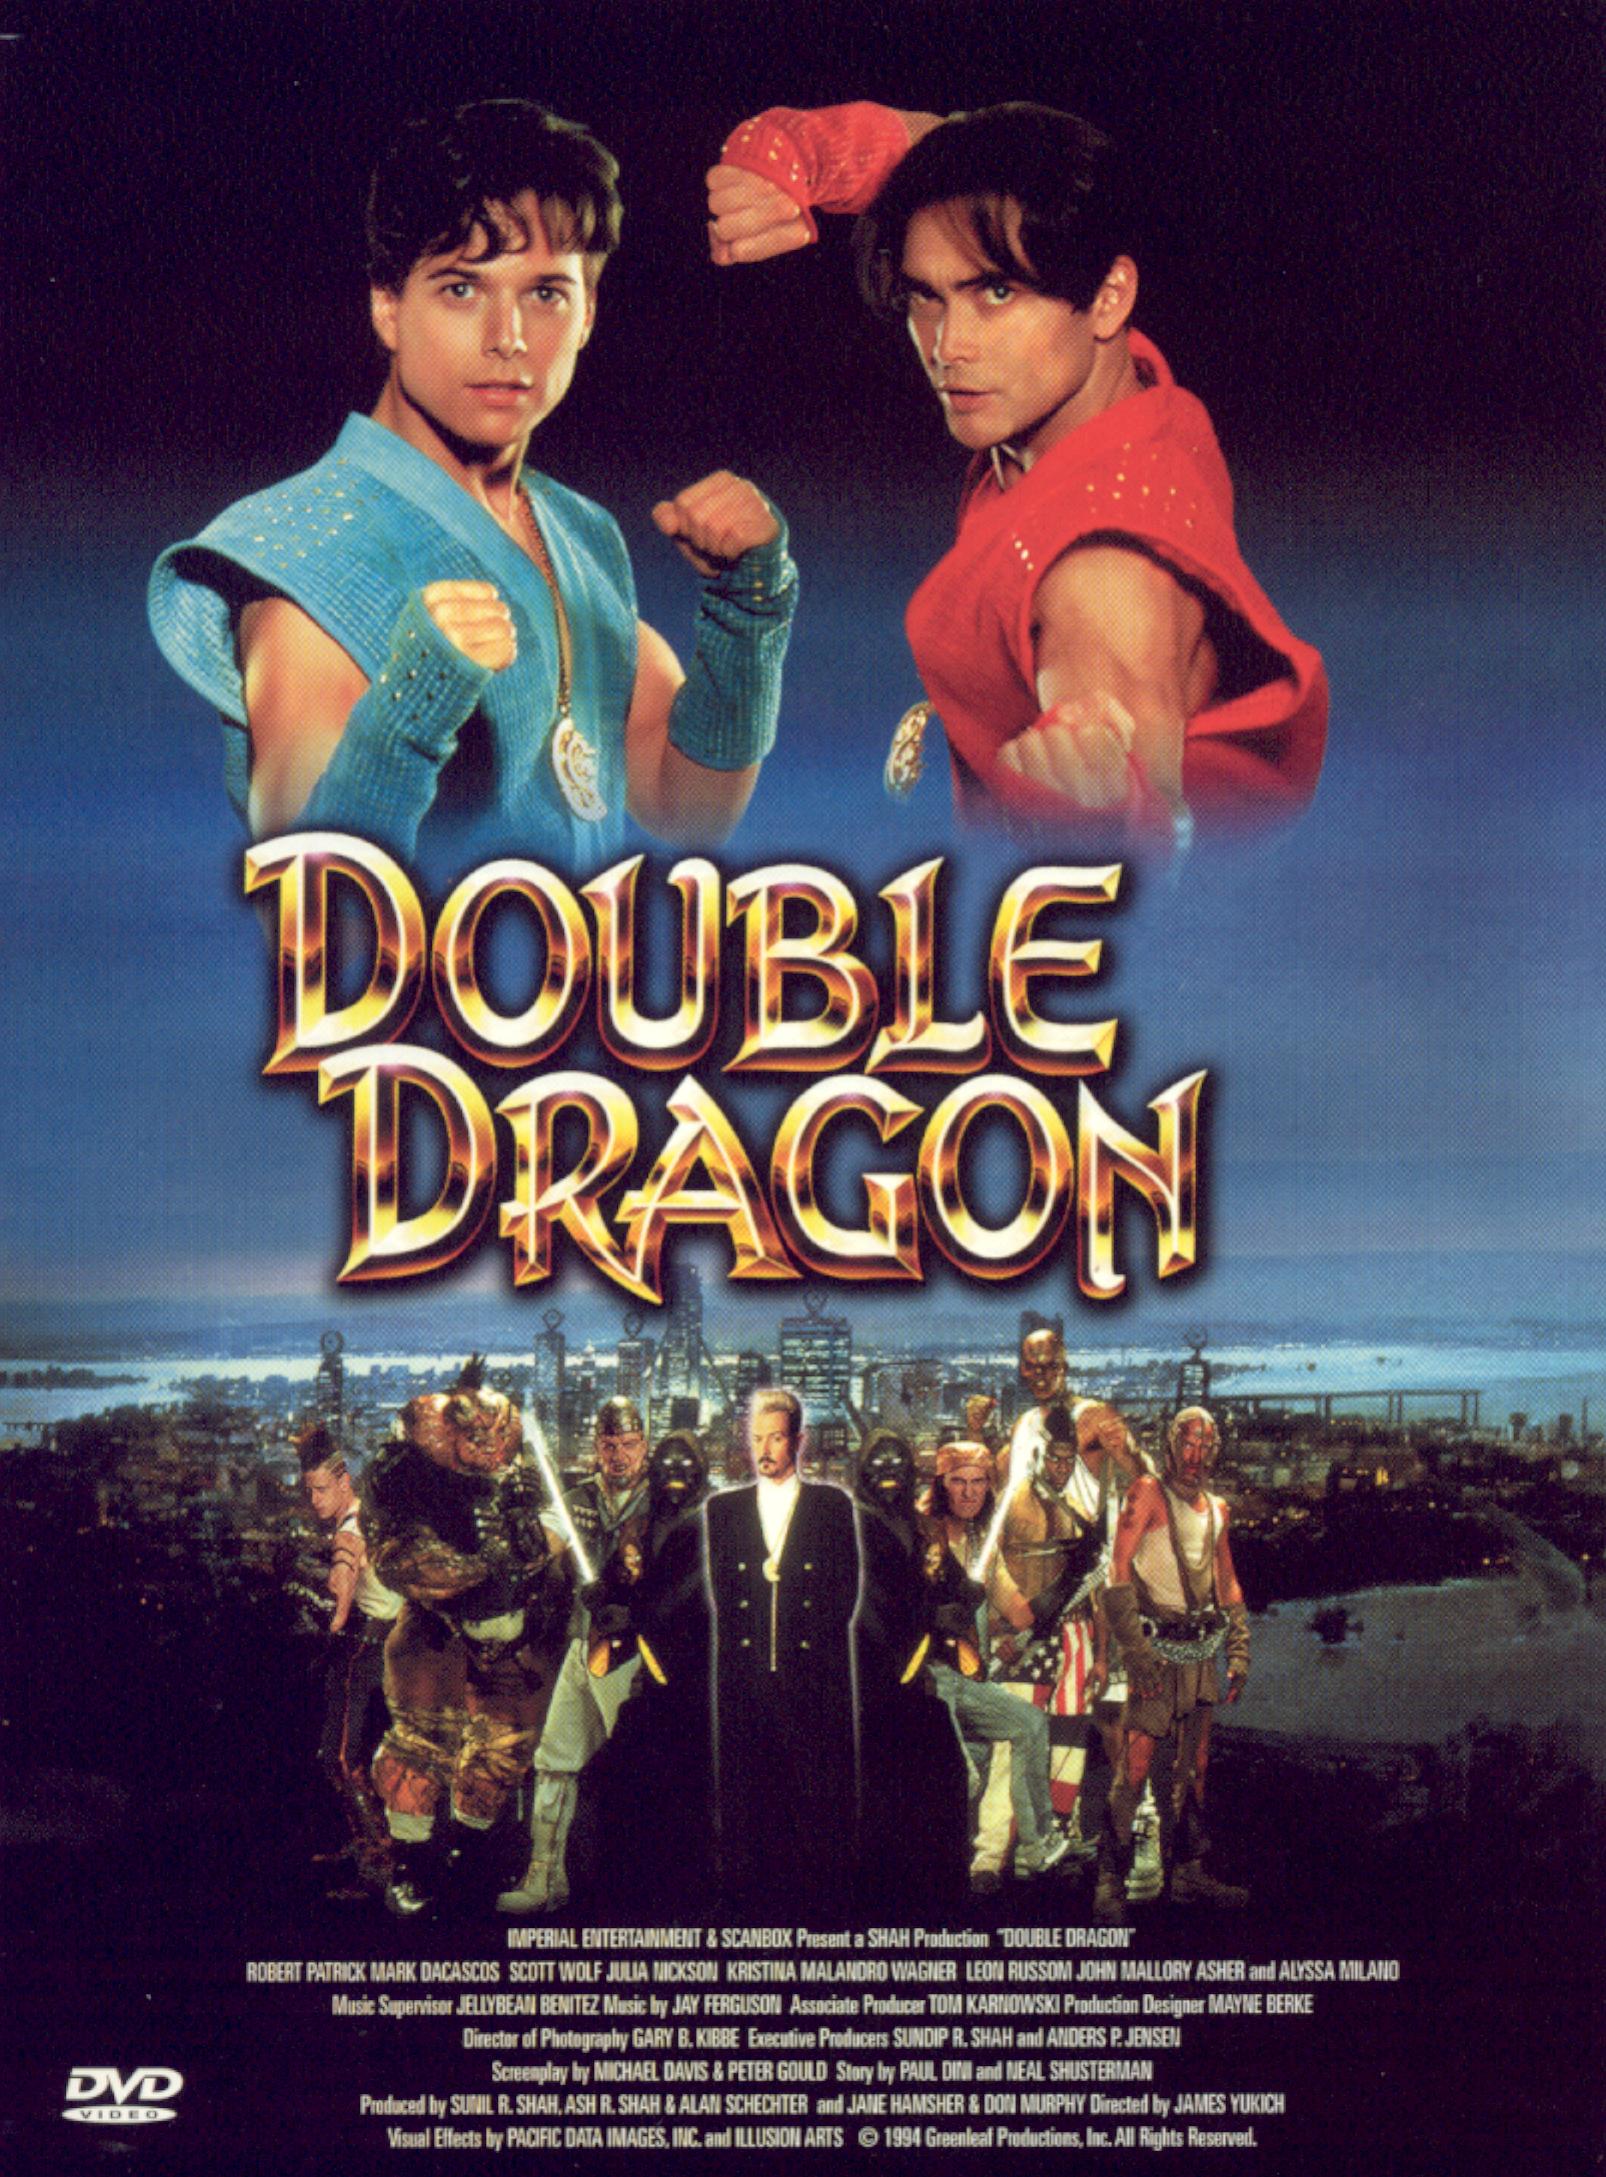 Double Dragon [Special Edition] [Blu-ray/DVD] [1994] - Best Buy